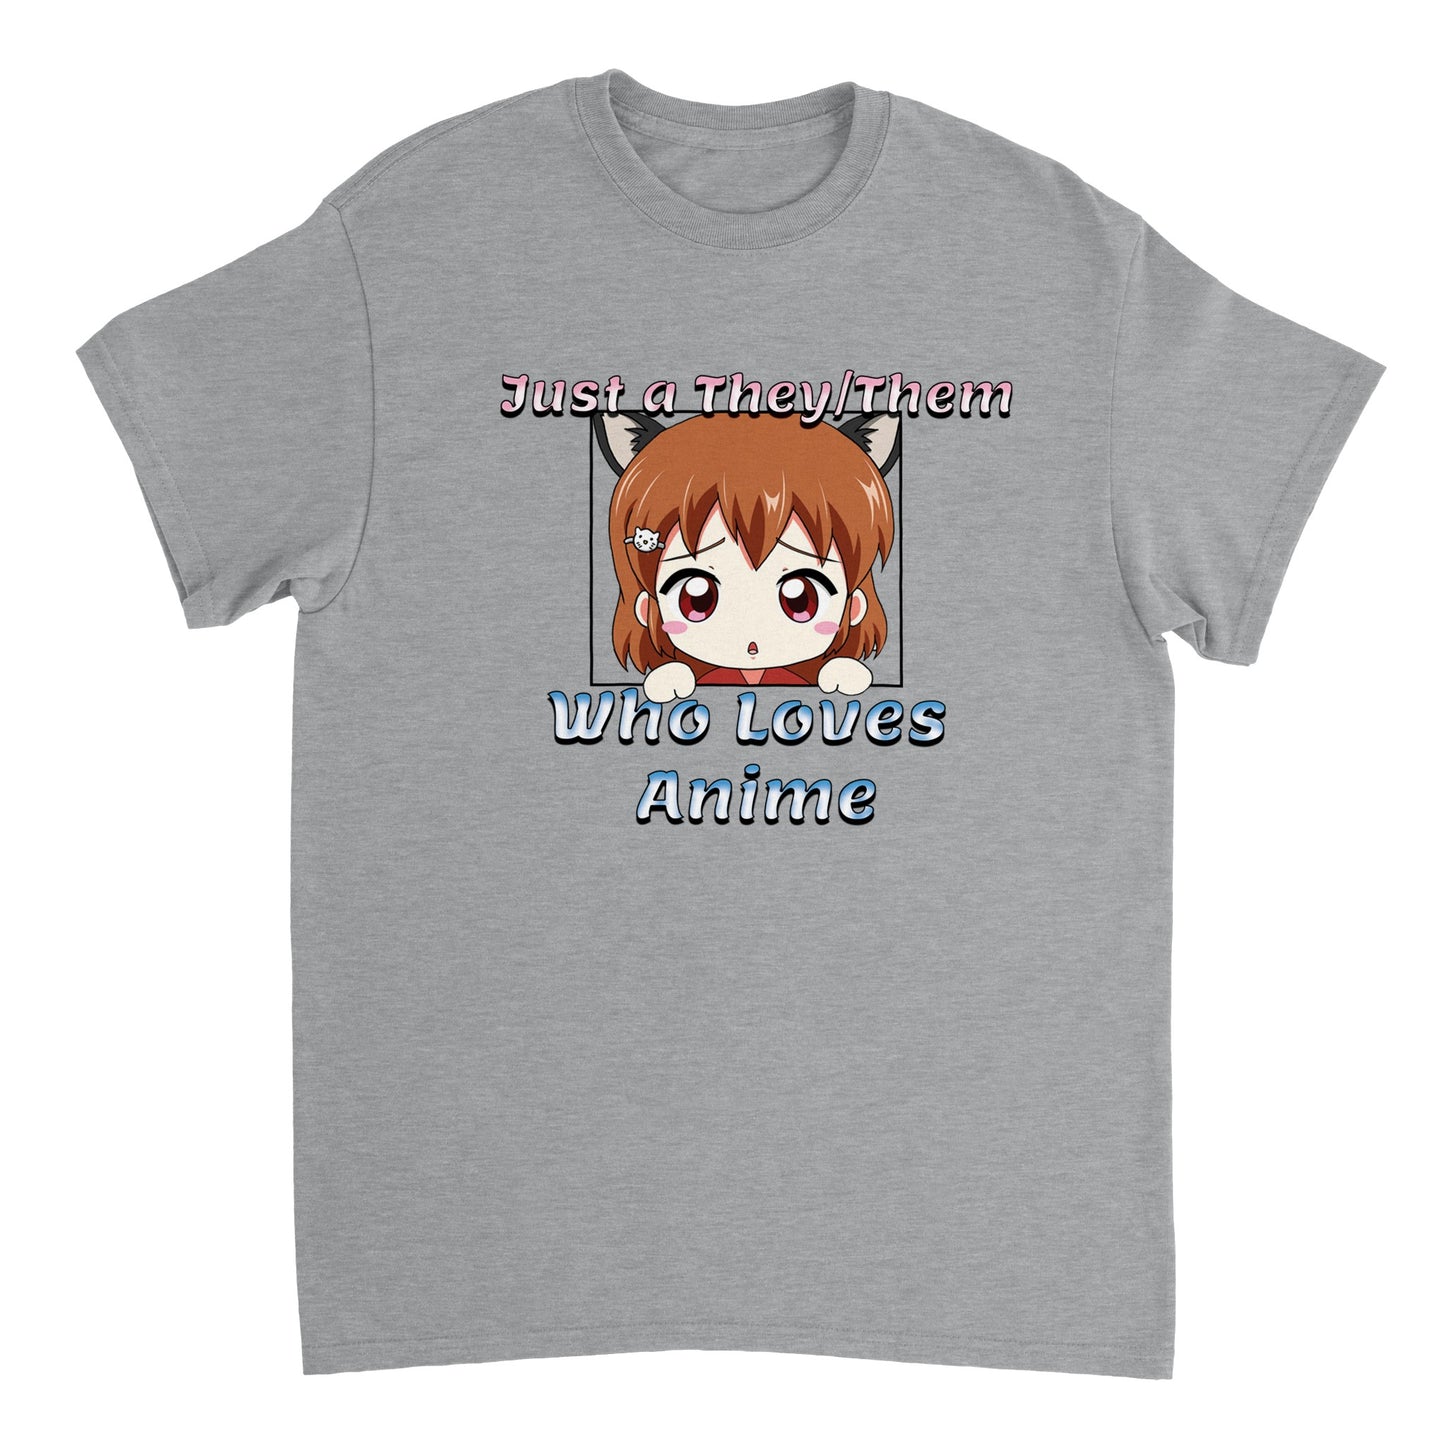 Just a They / Them Who Loves Anime T Shirt